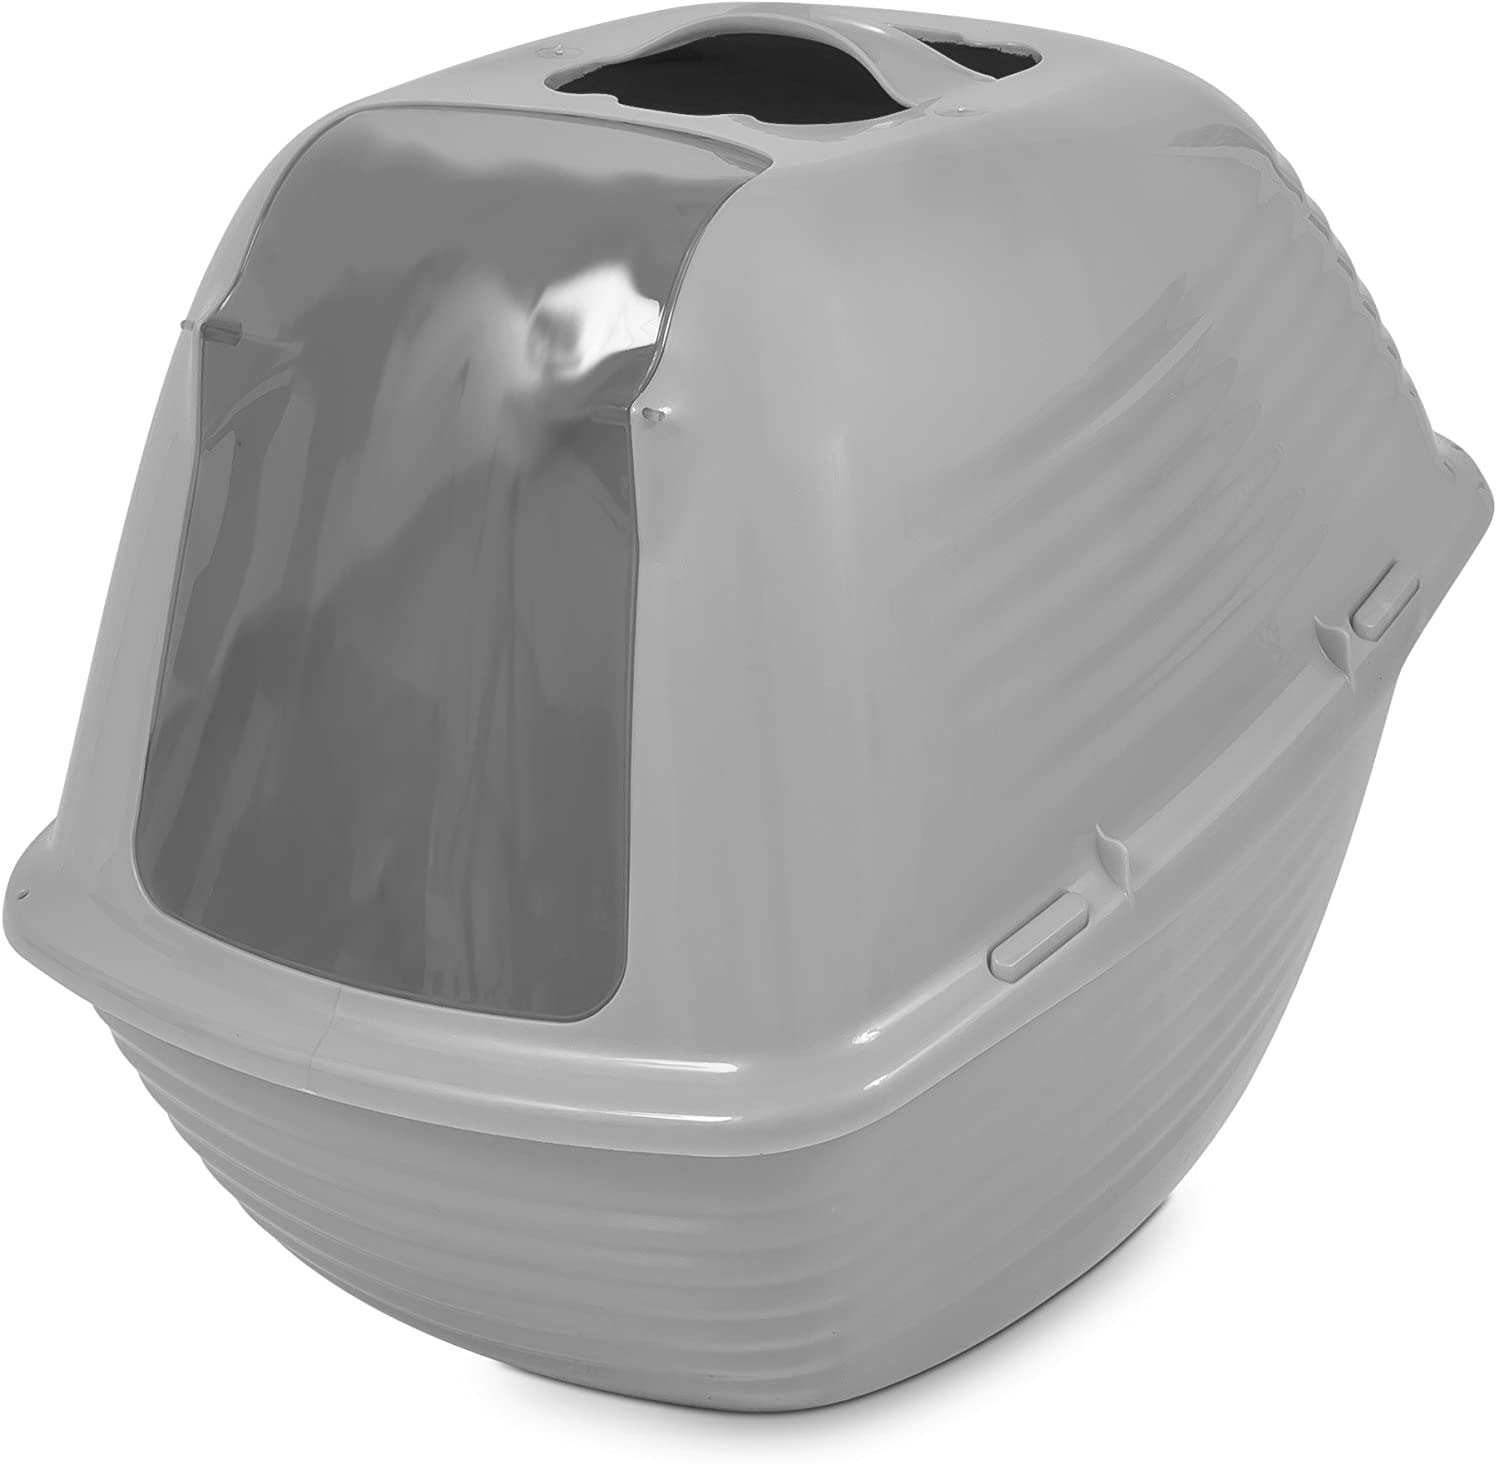 Petmate Stayfresh Cat Litter Hooded Tray - With Door, Silver